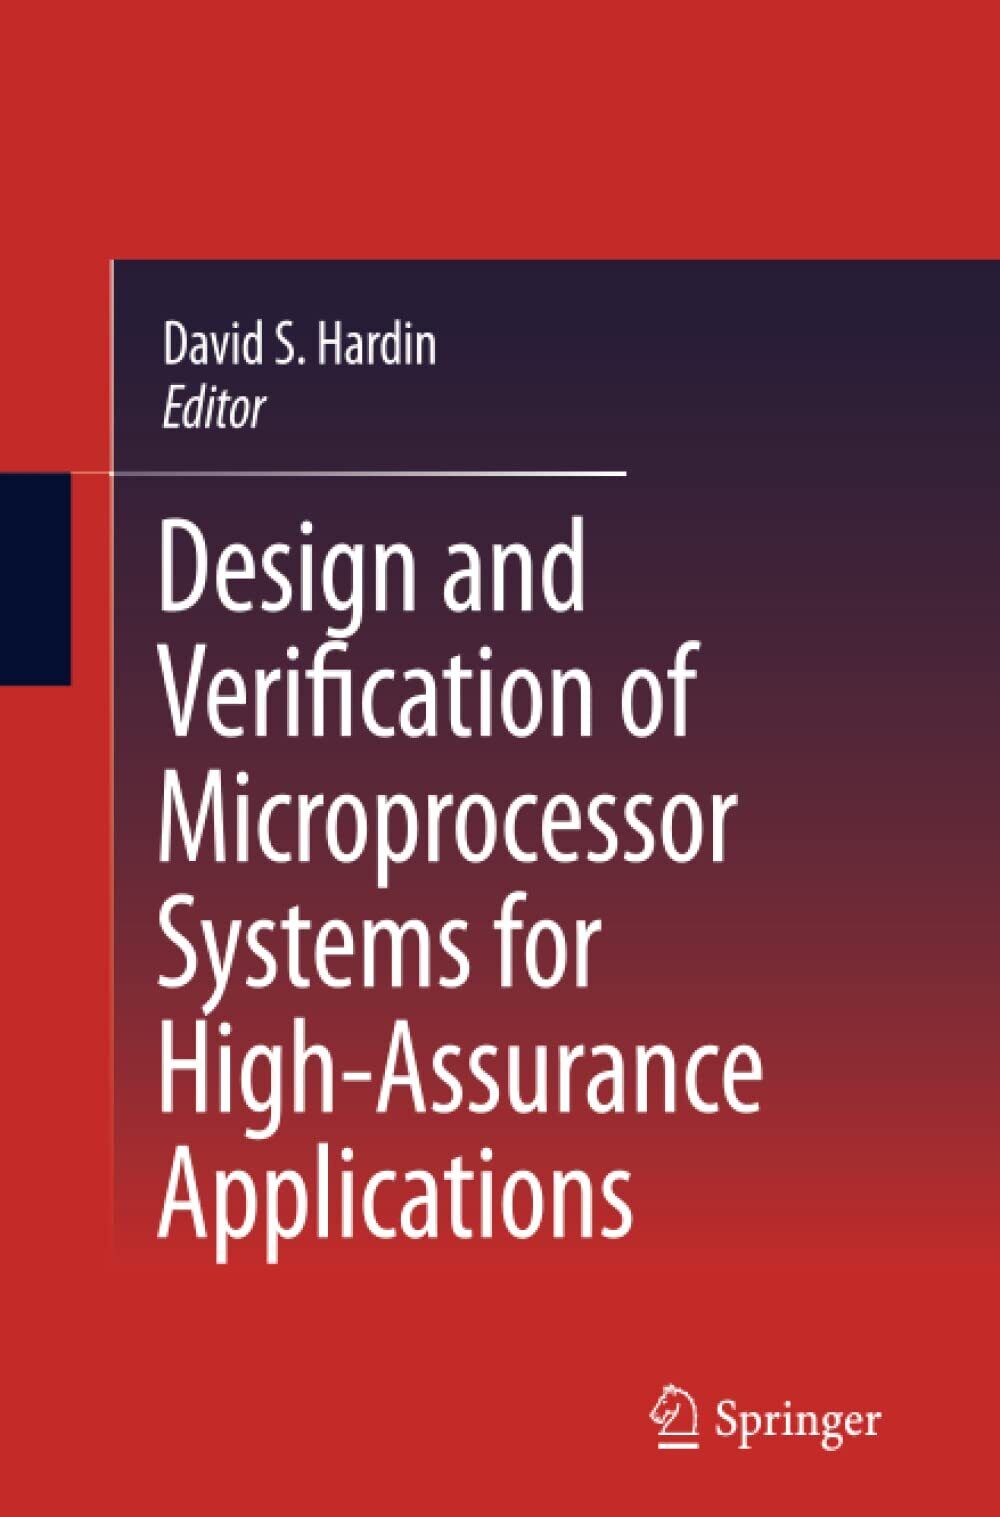 Design and Verification of Microprocessor Systems for High-Assurance Application libro usato